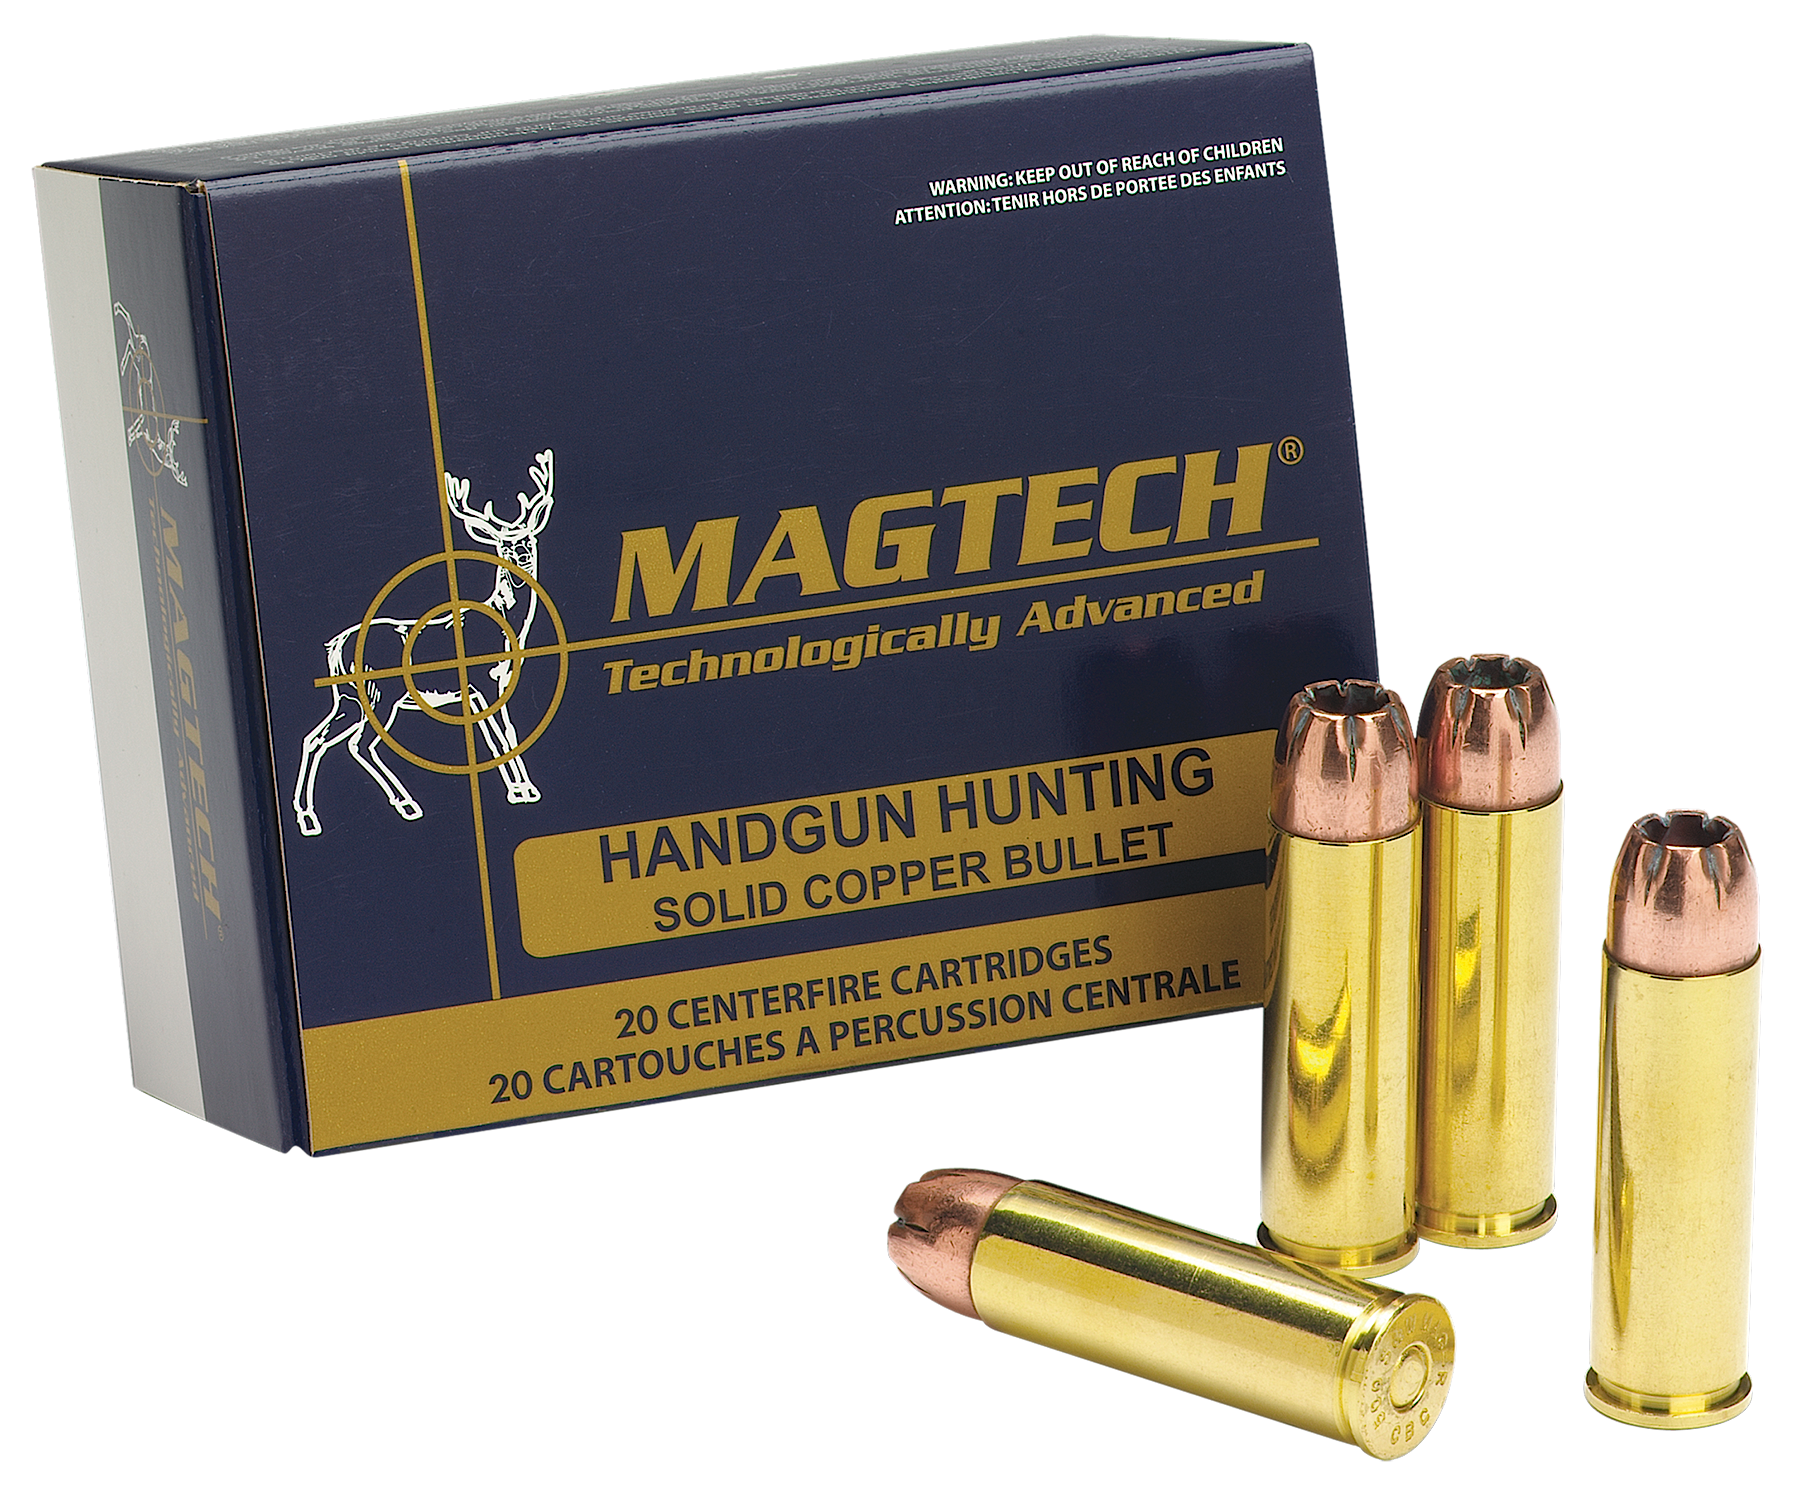 Magtech Sport Shooting Smith Wesson Semi-JSP Ammo